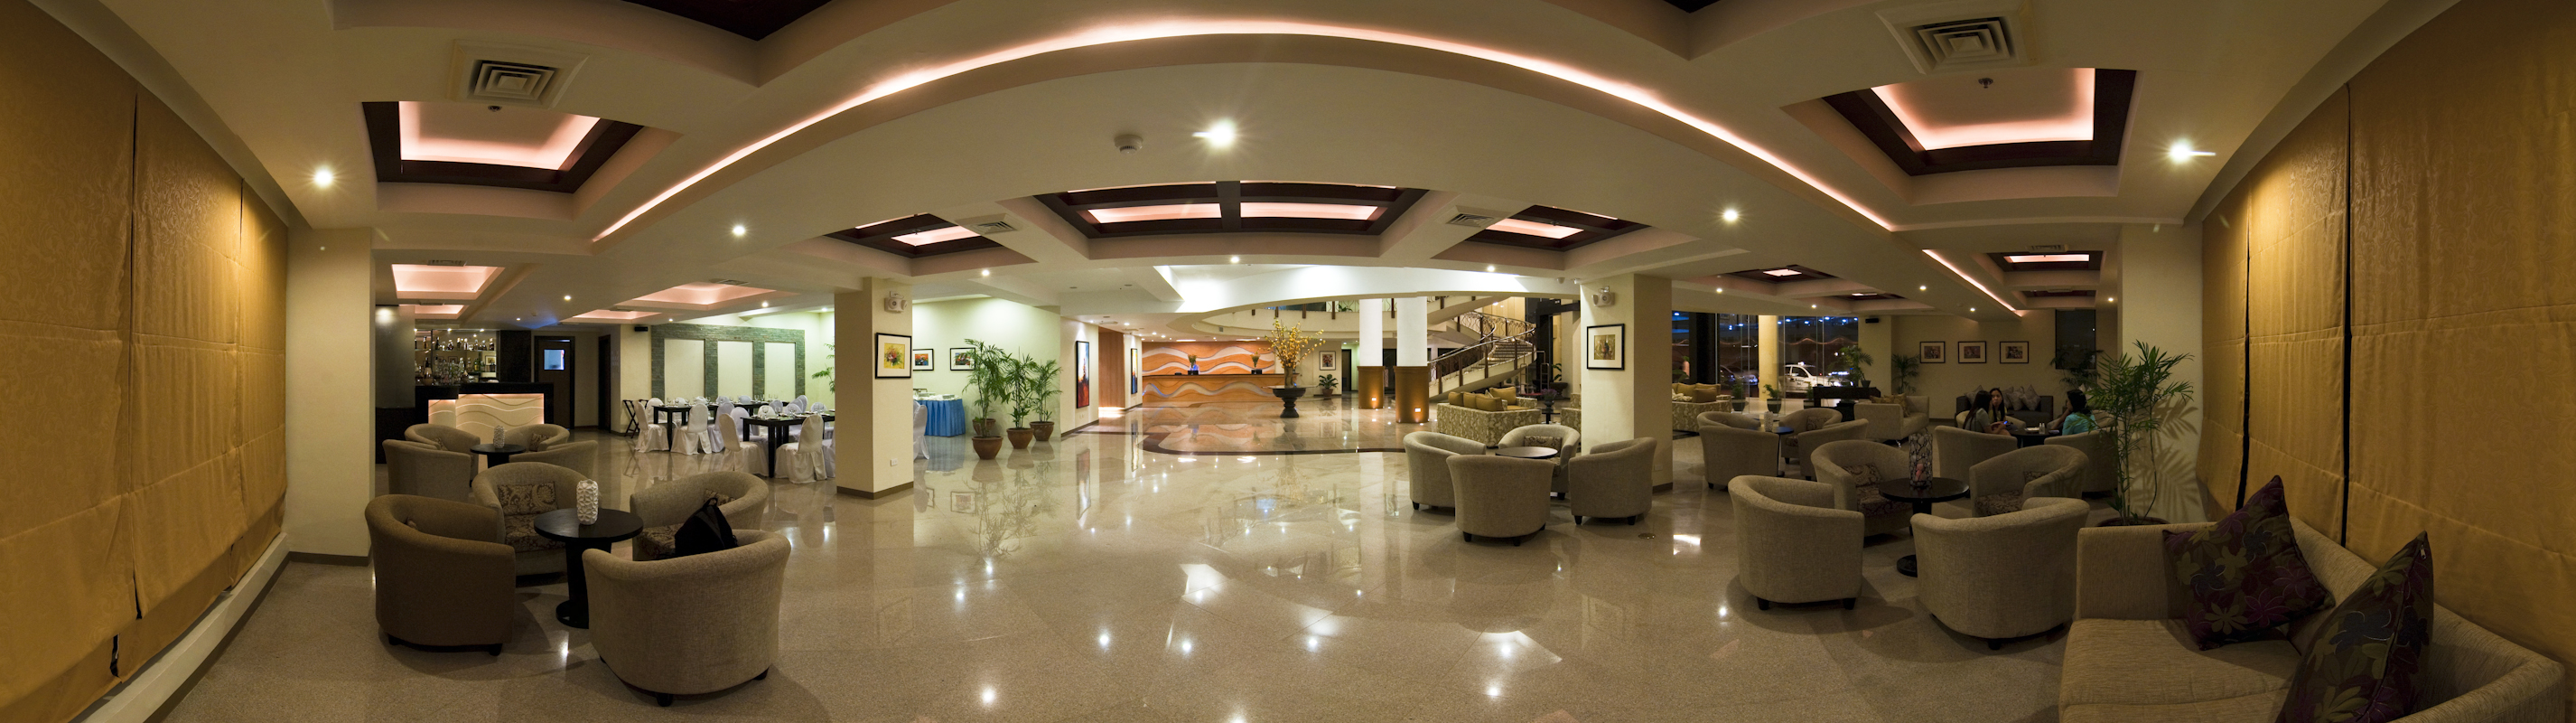 The Pinnacle Hotel and Suites - Lobby 11